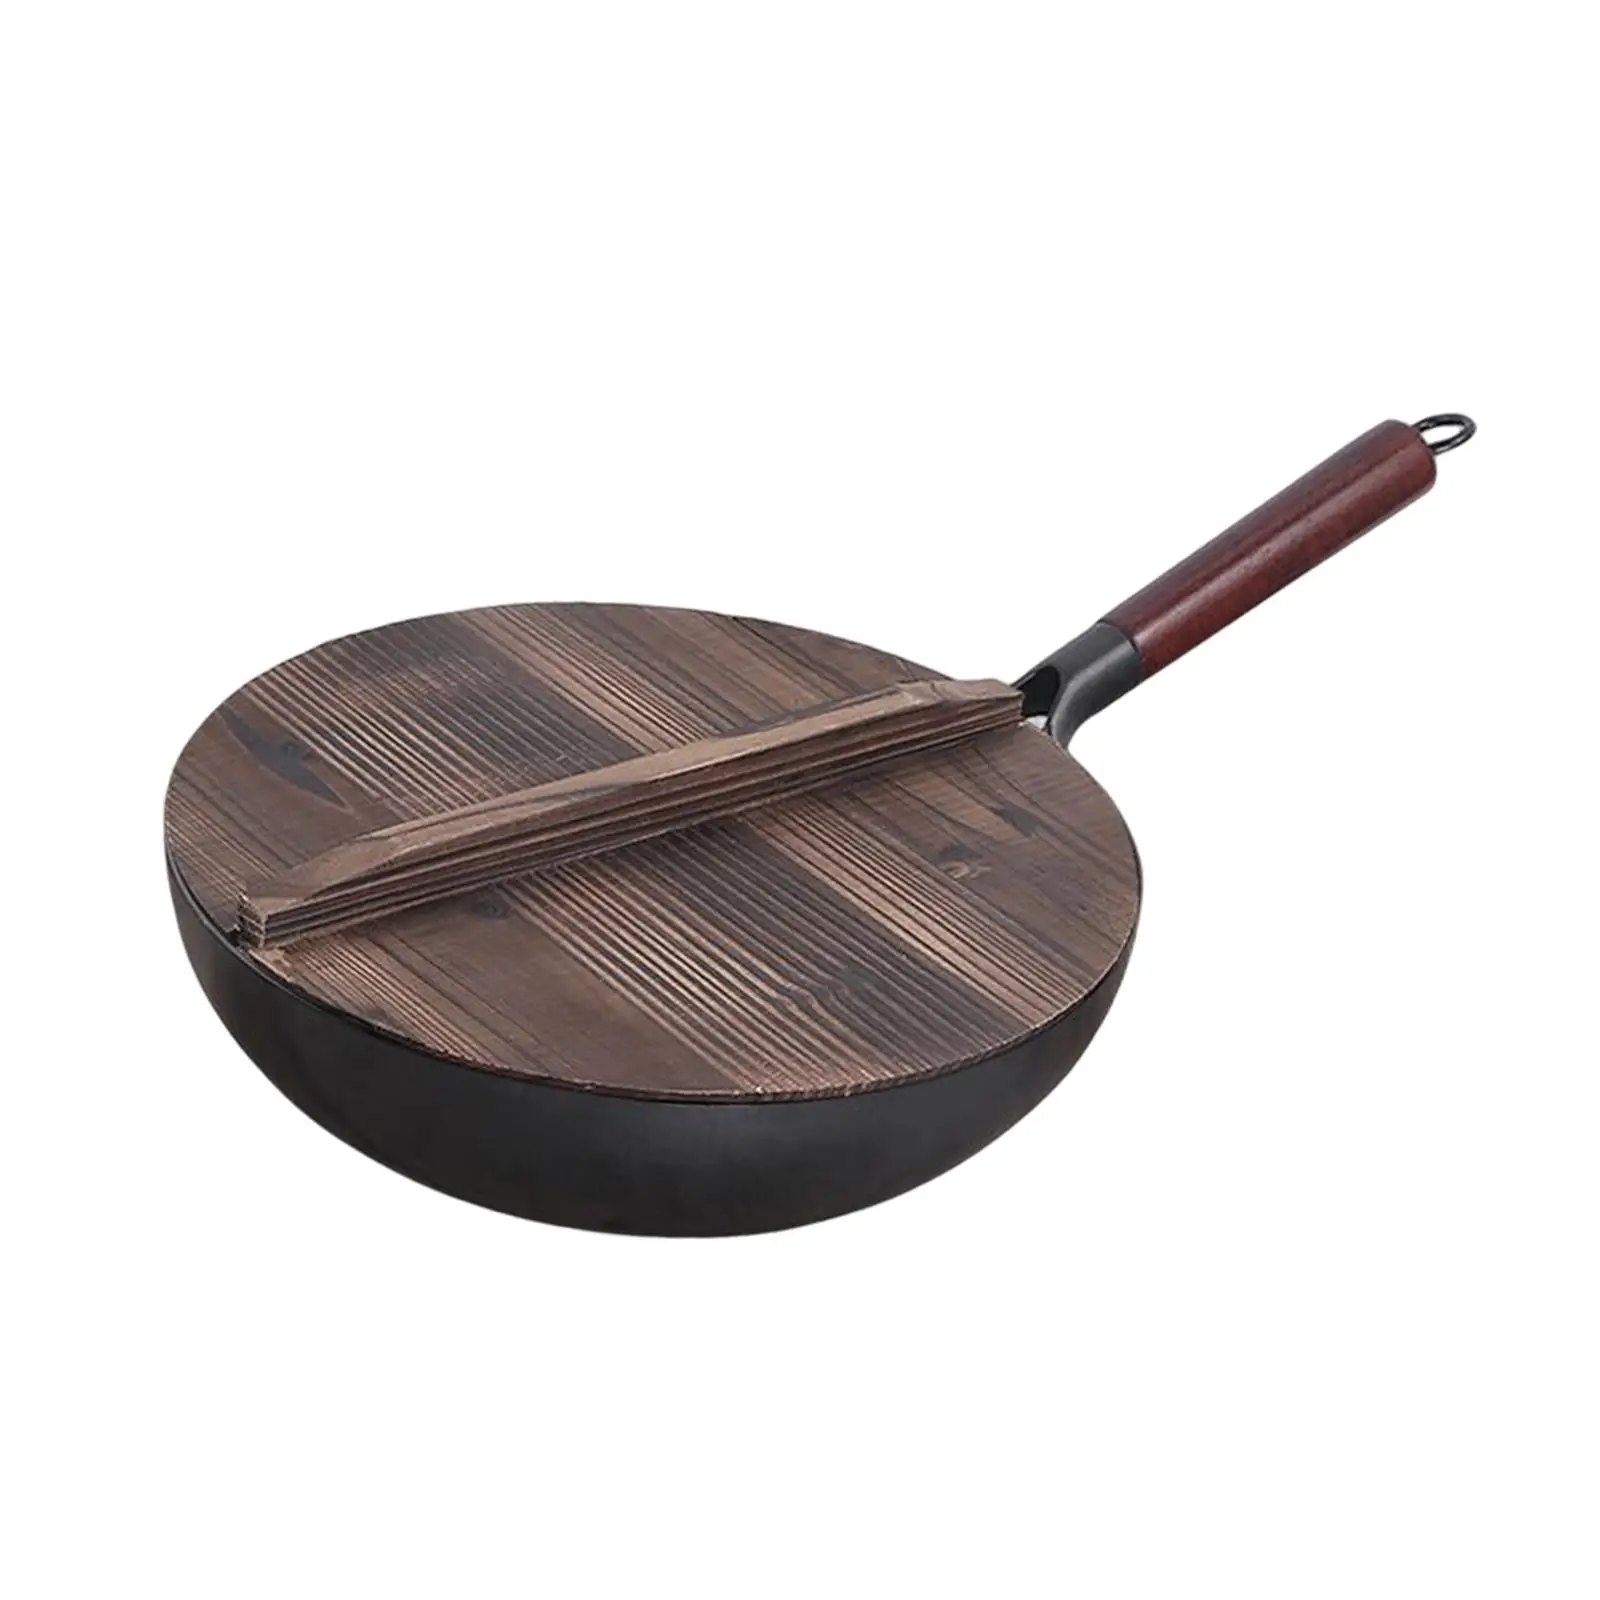 Wok Pan Household Long Handle Wok Pan with Lid for Induction Electric, Gas, 12inch Vegetable